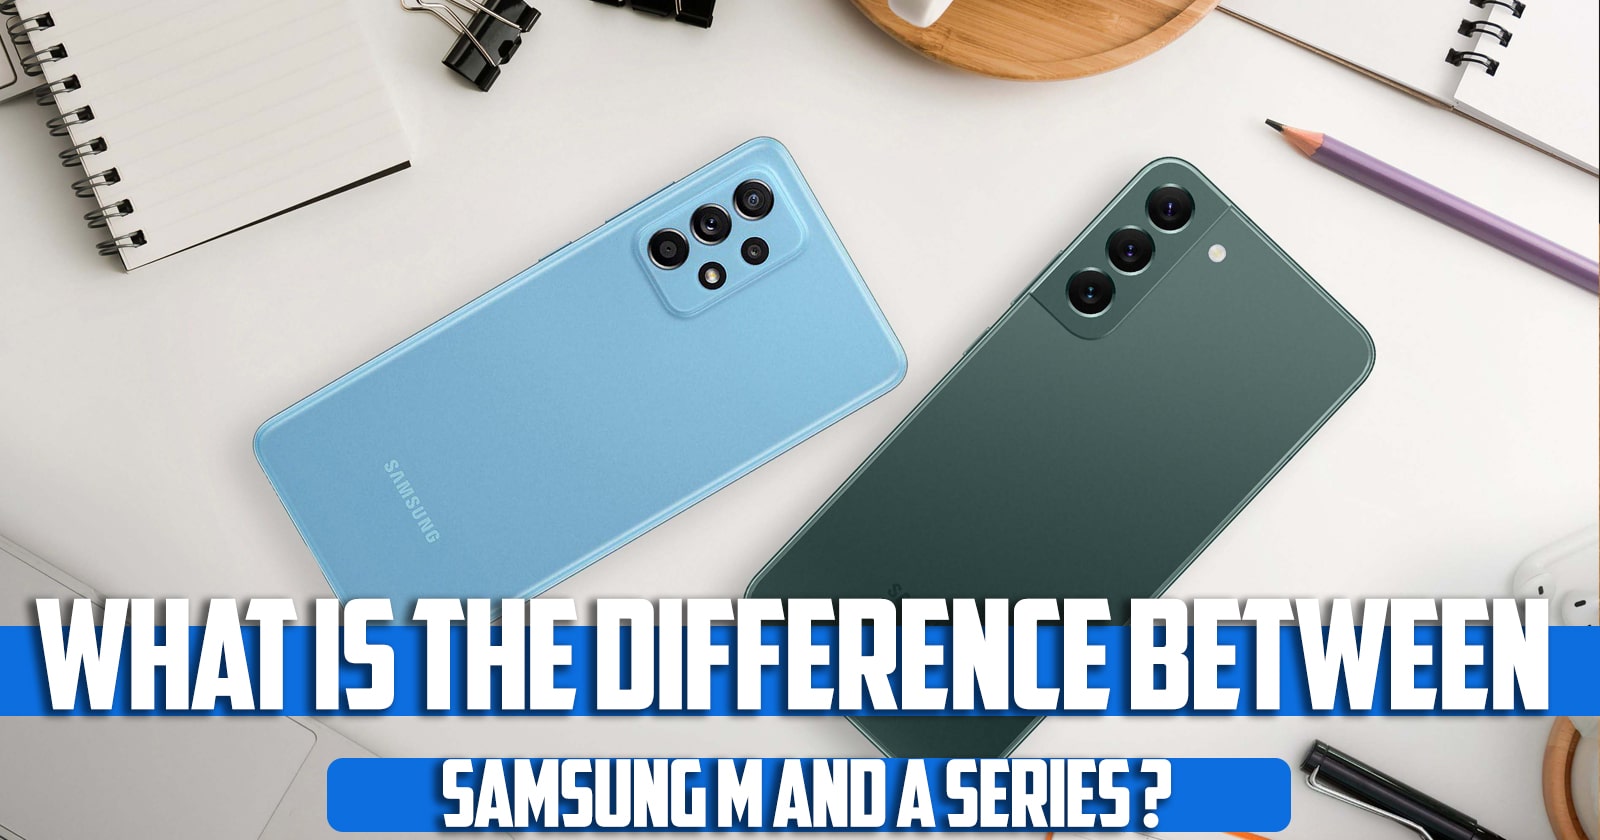 What is the difference between Samsung M and A series?